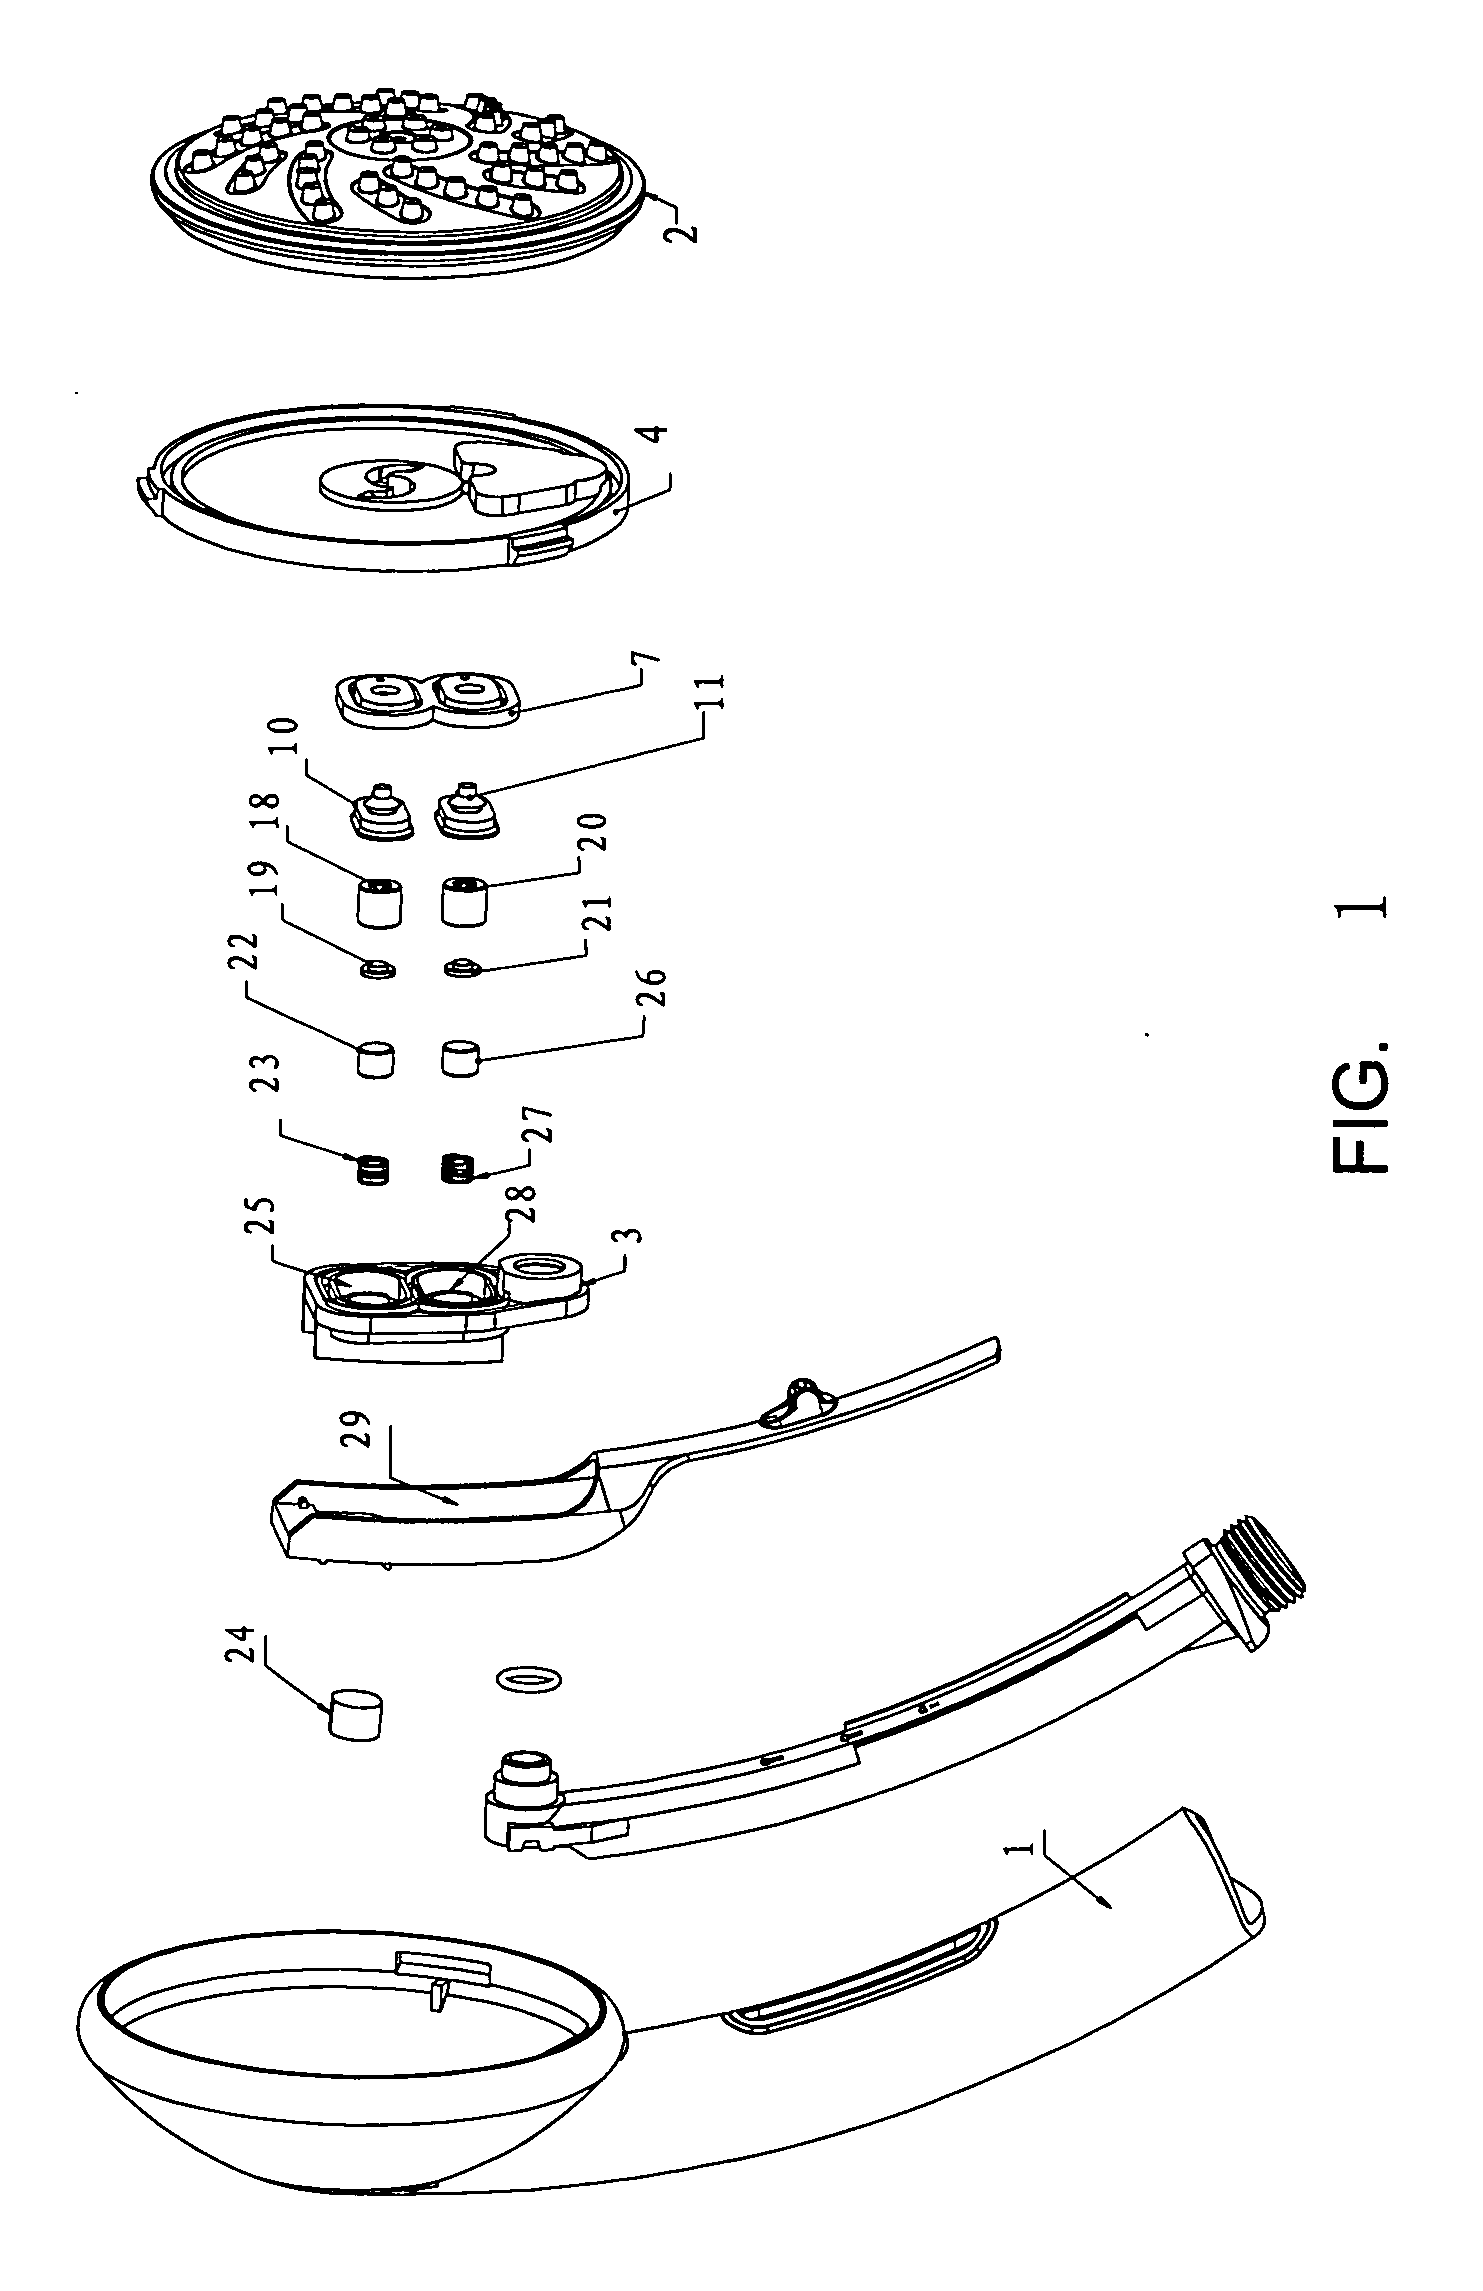 Water Outlet Control Device of Shower Spray Nozzle